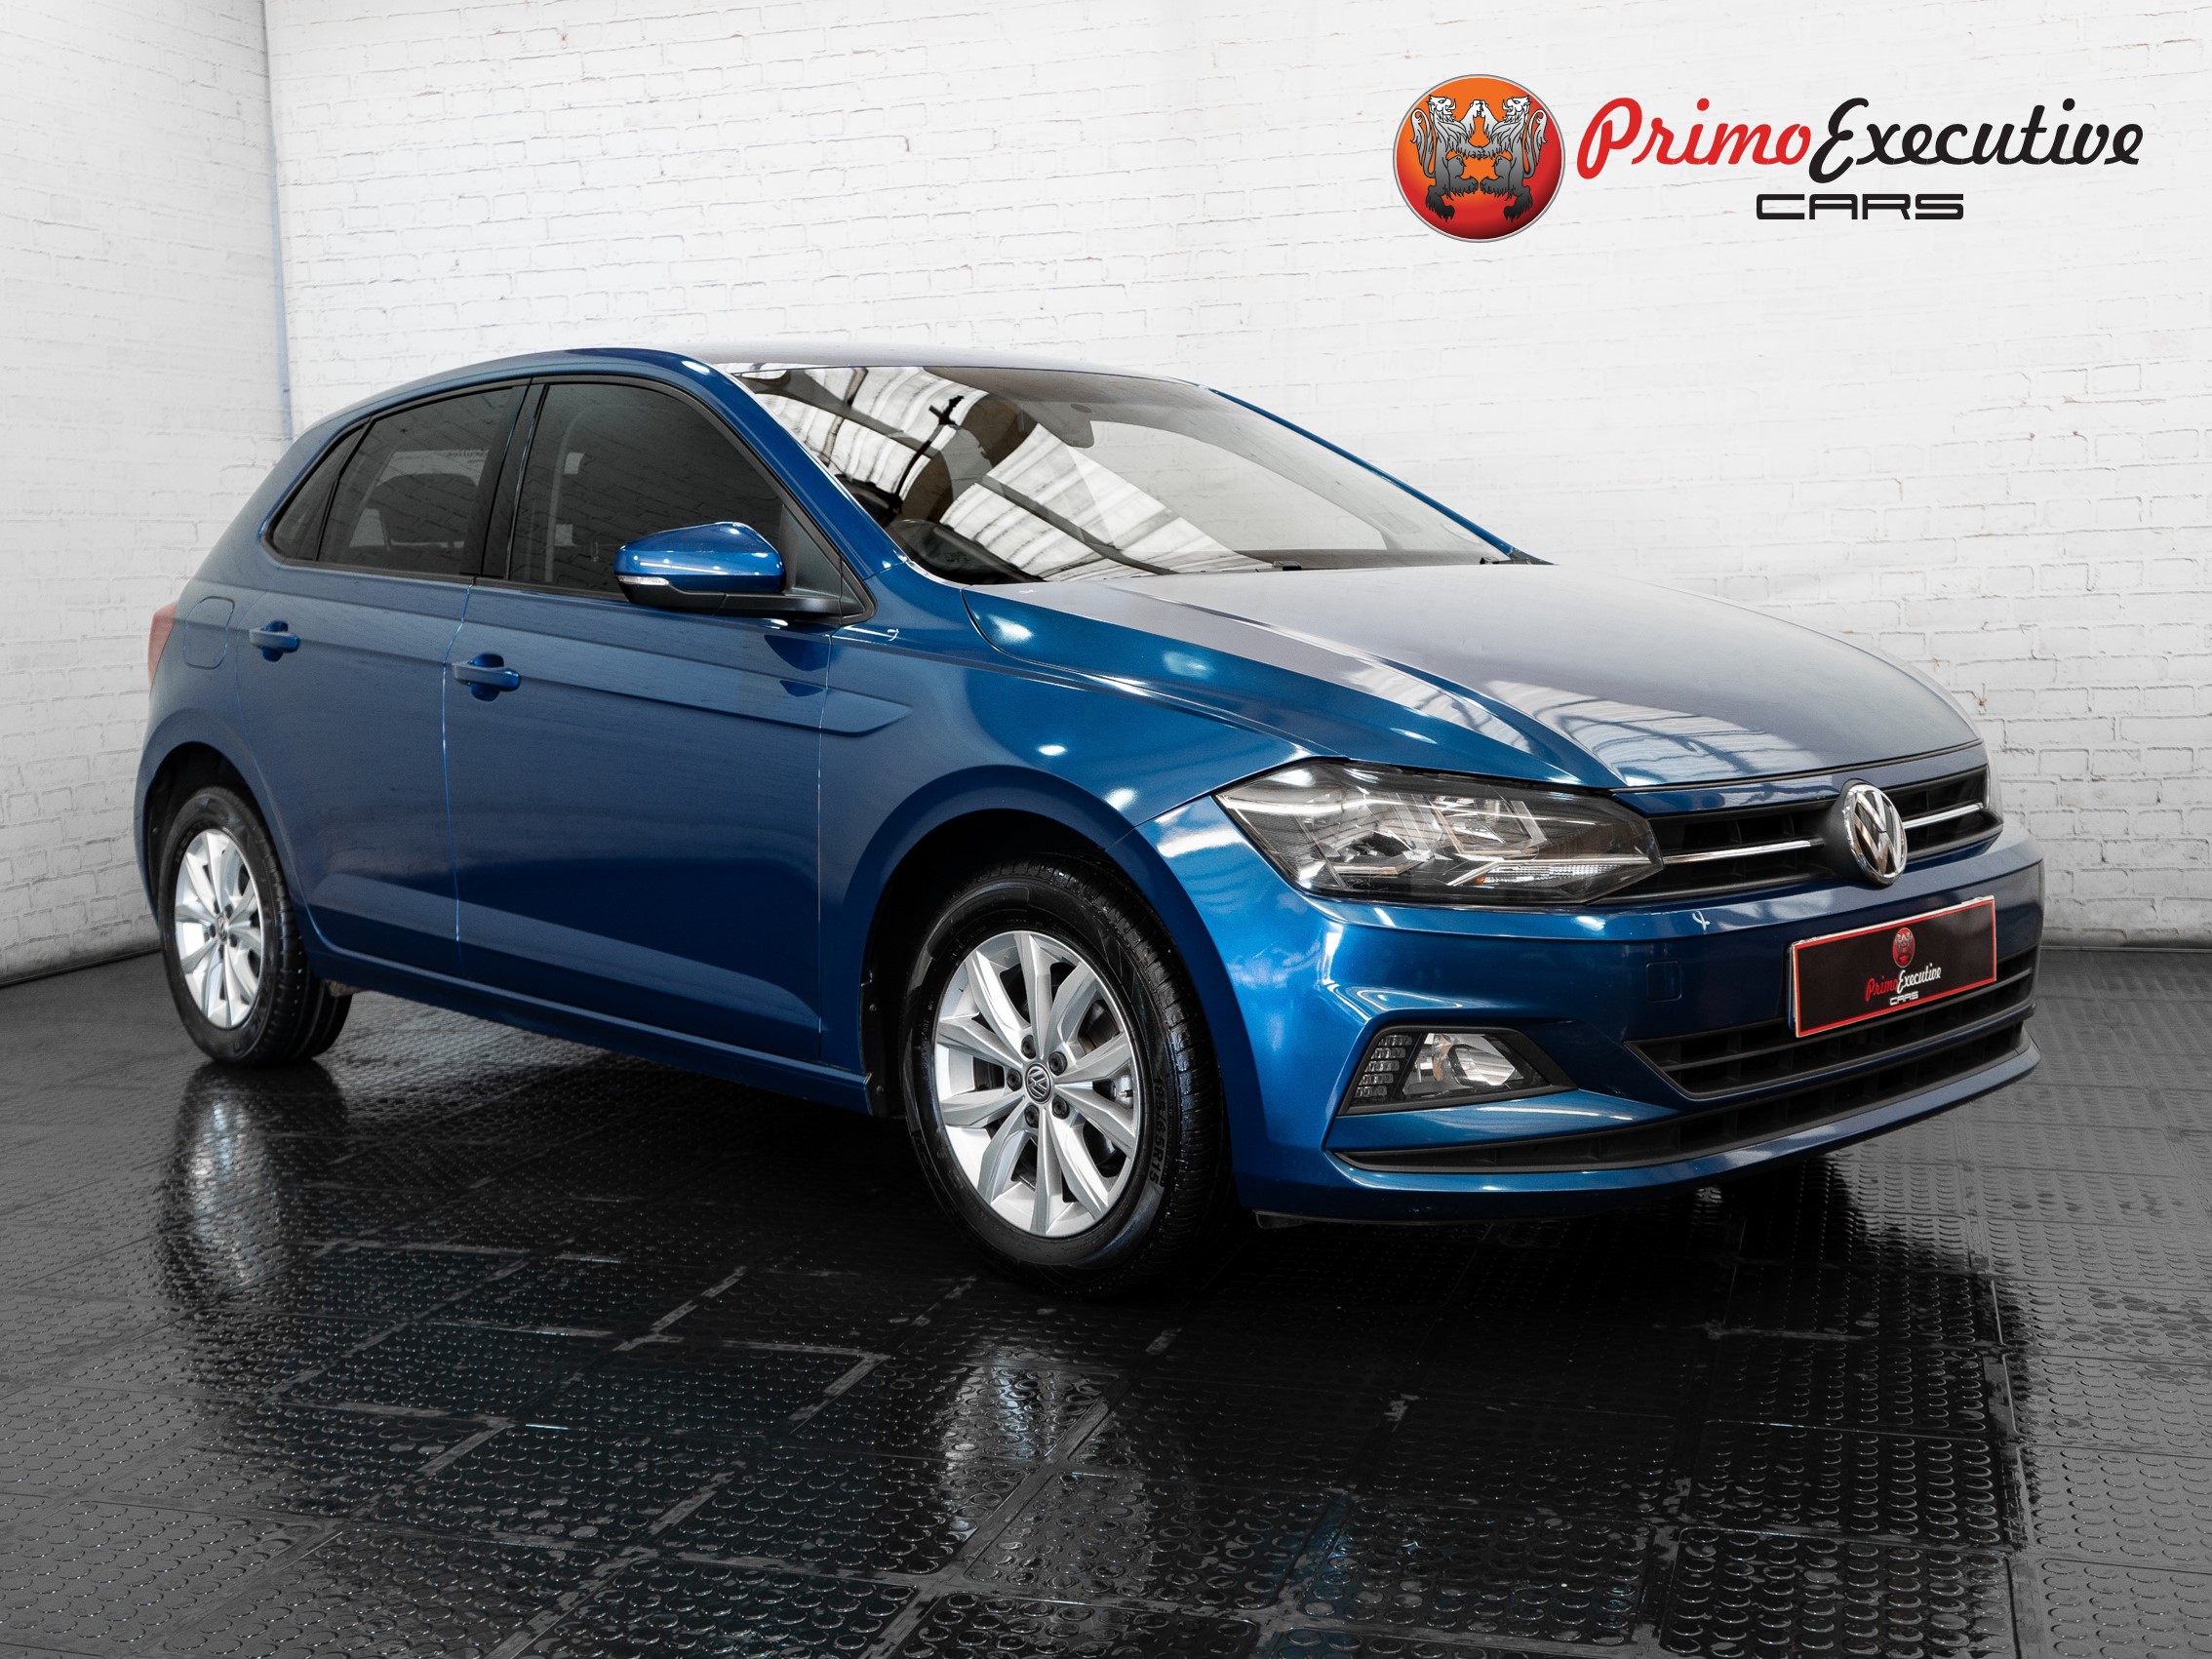 2019 Volkswagen Polo Hatch  for sale - 510534